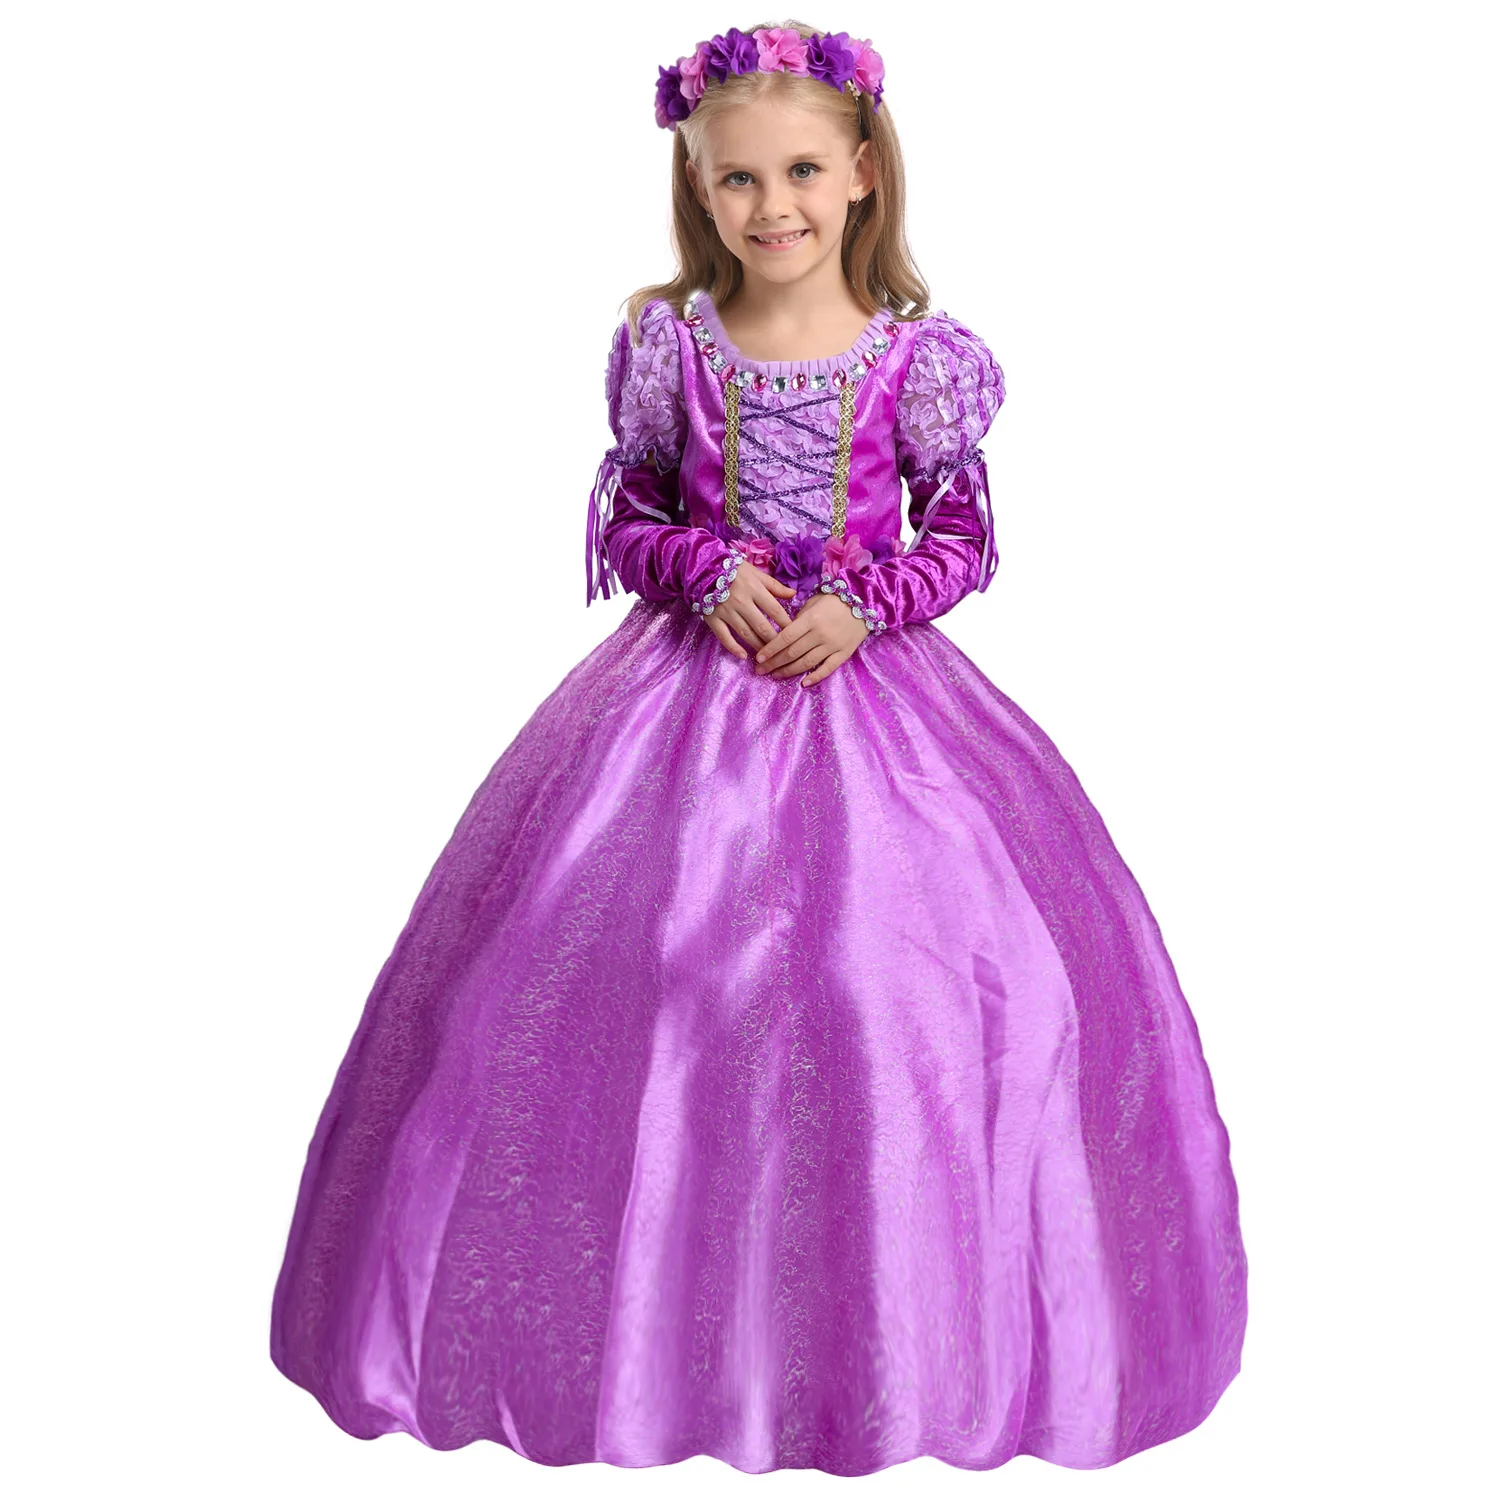 Compare Prices on Party Dresses 13 Year Olds- Online Shopping/Buy ...